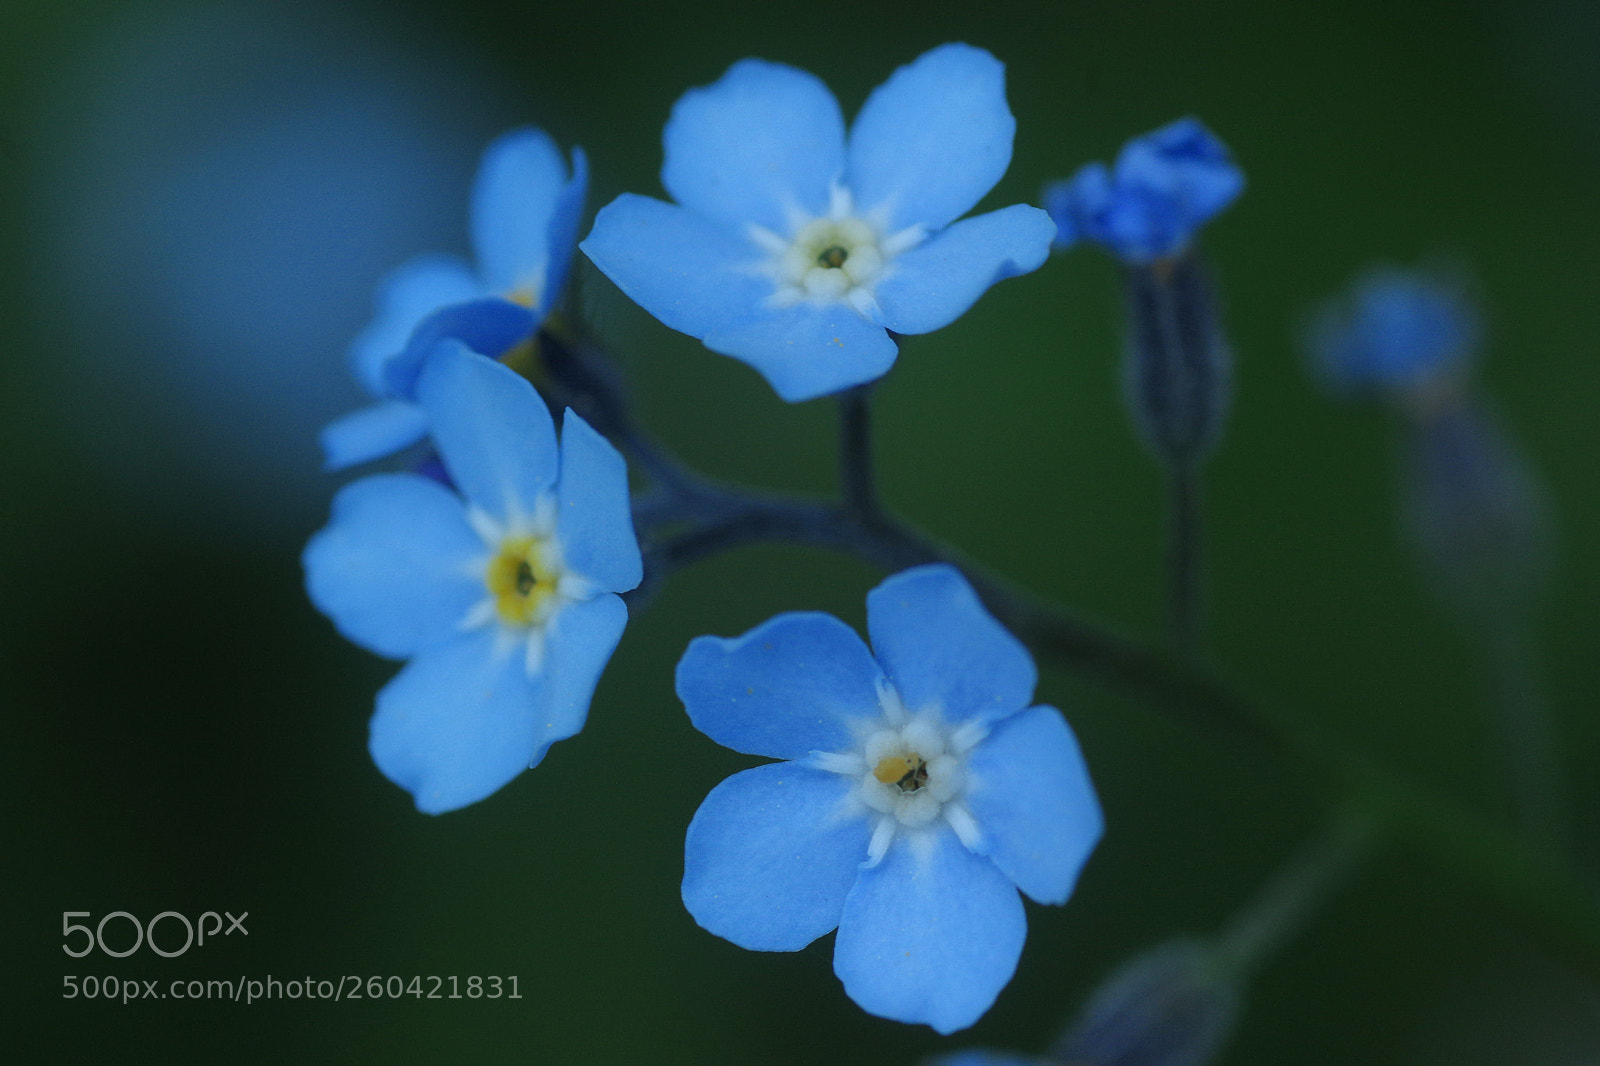 Pentax K-3 sample photo. Forget-me-not photography